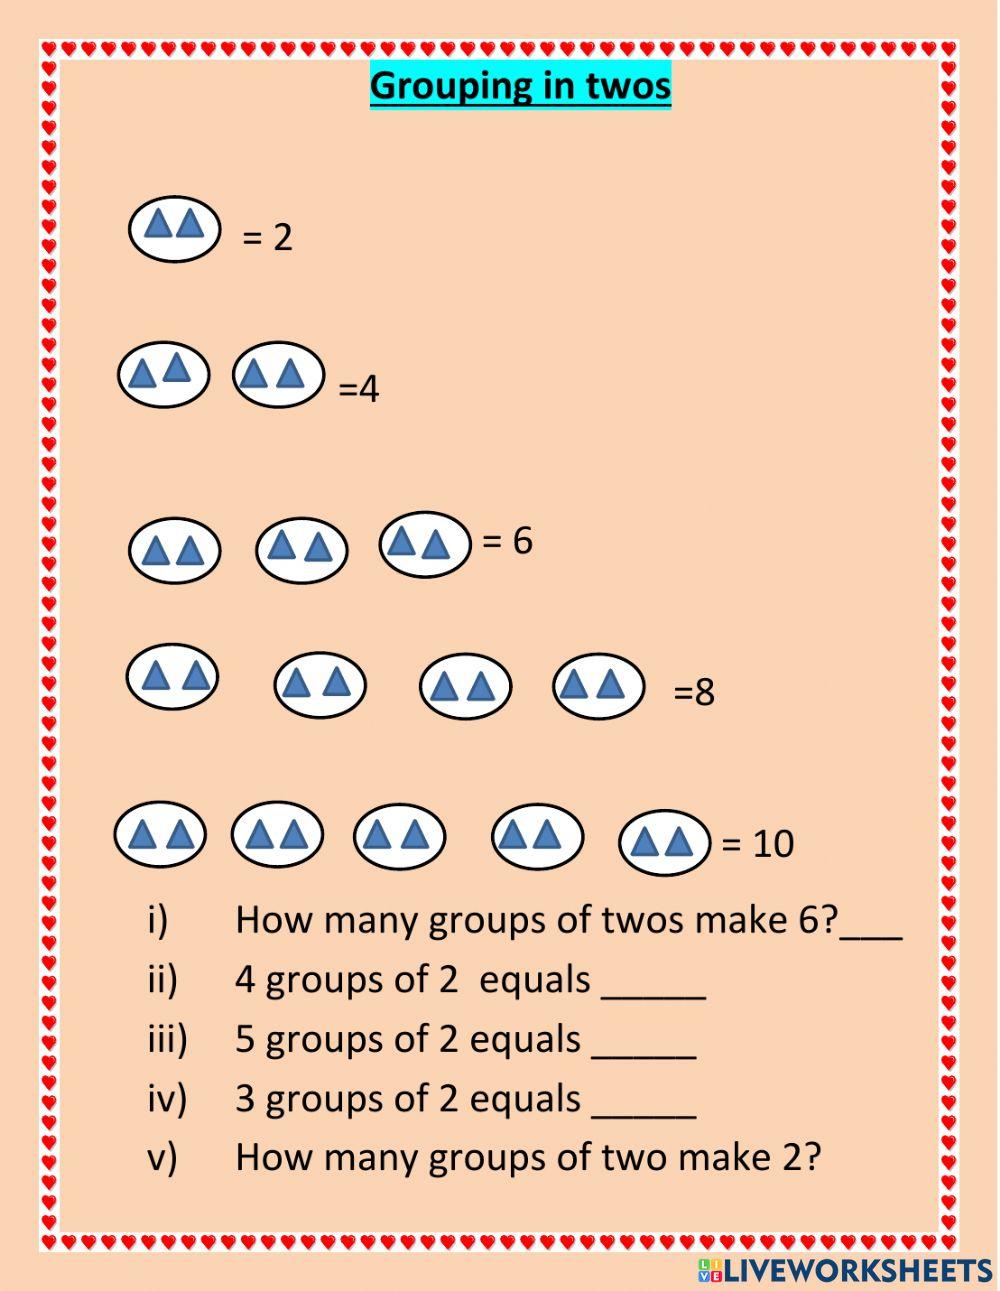 Grouping in twos